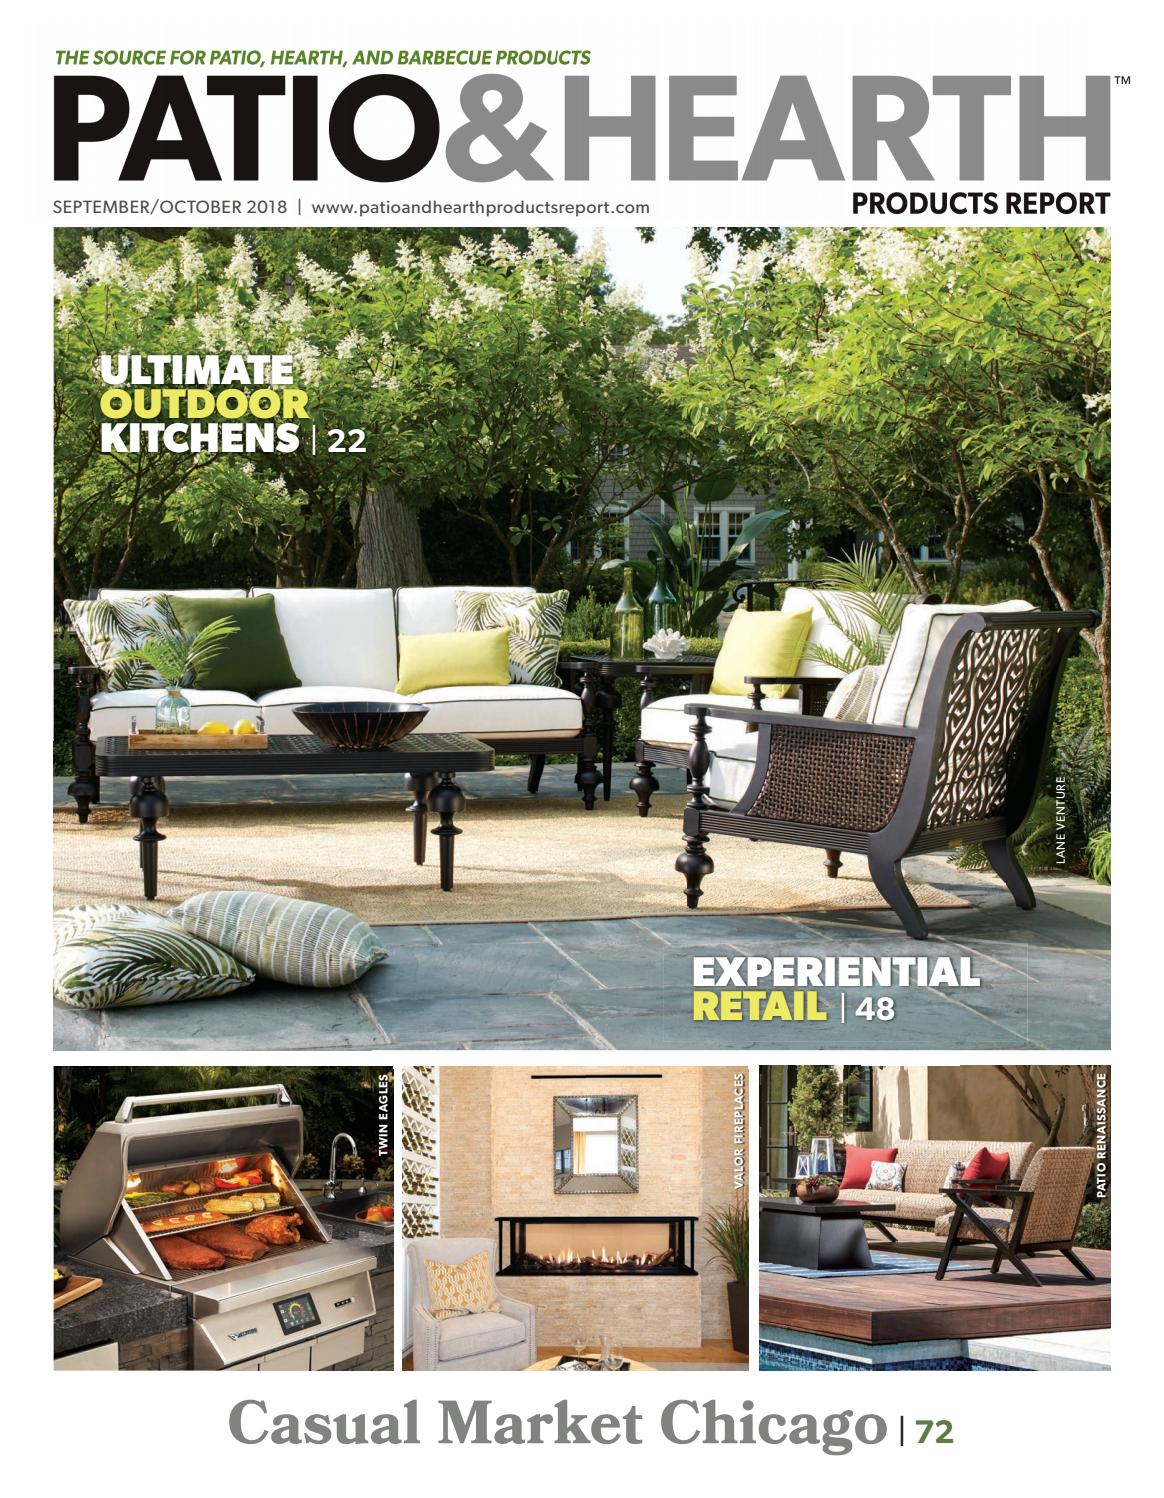 Mendota Gas Fireplace Insert Reviews Beautiful Patio & Hearth Products Report September October 2018 by